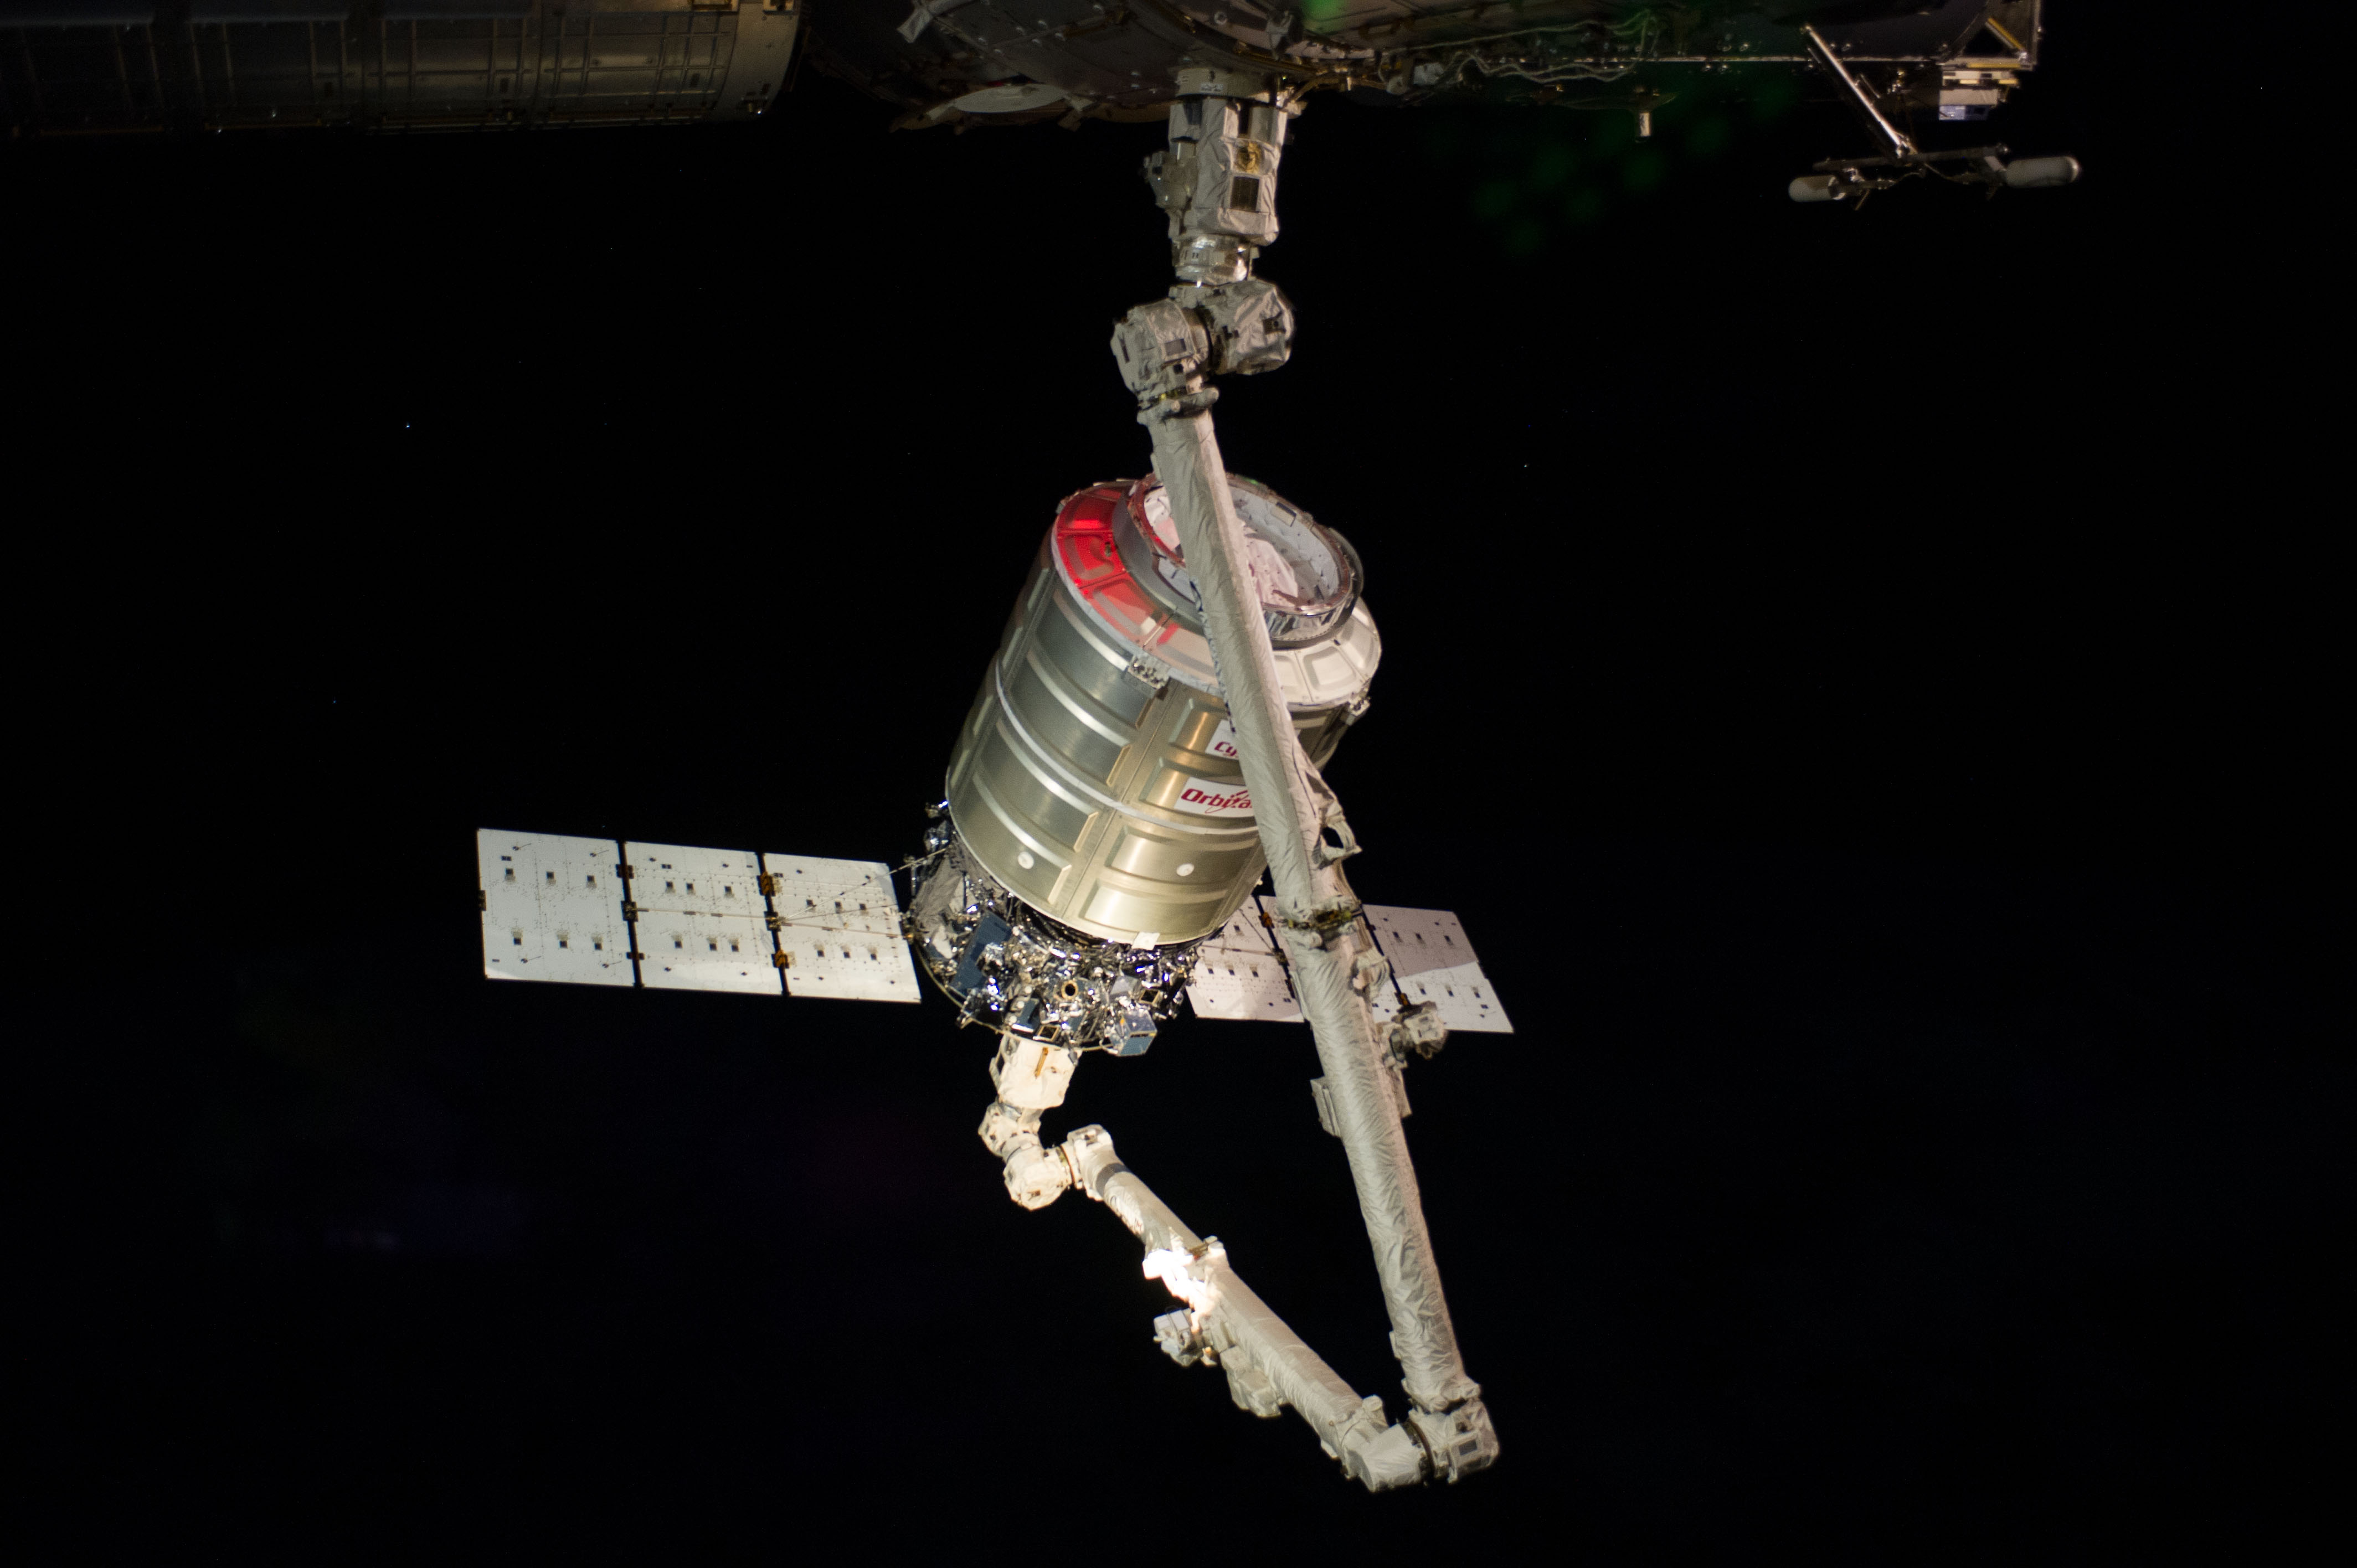 CRS Orb-2 Cygnus 3 S.S. Janice Voss grappled by Canadarm2 (ISS040-E-067885)